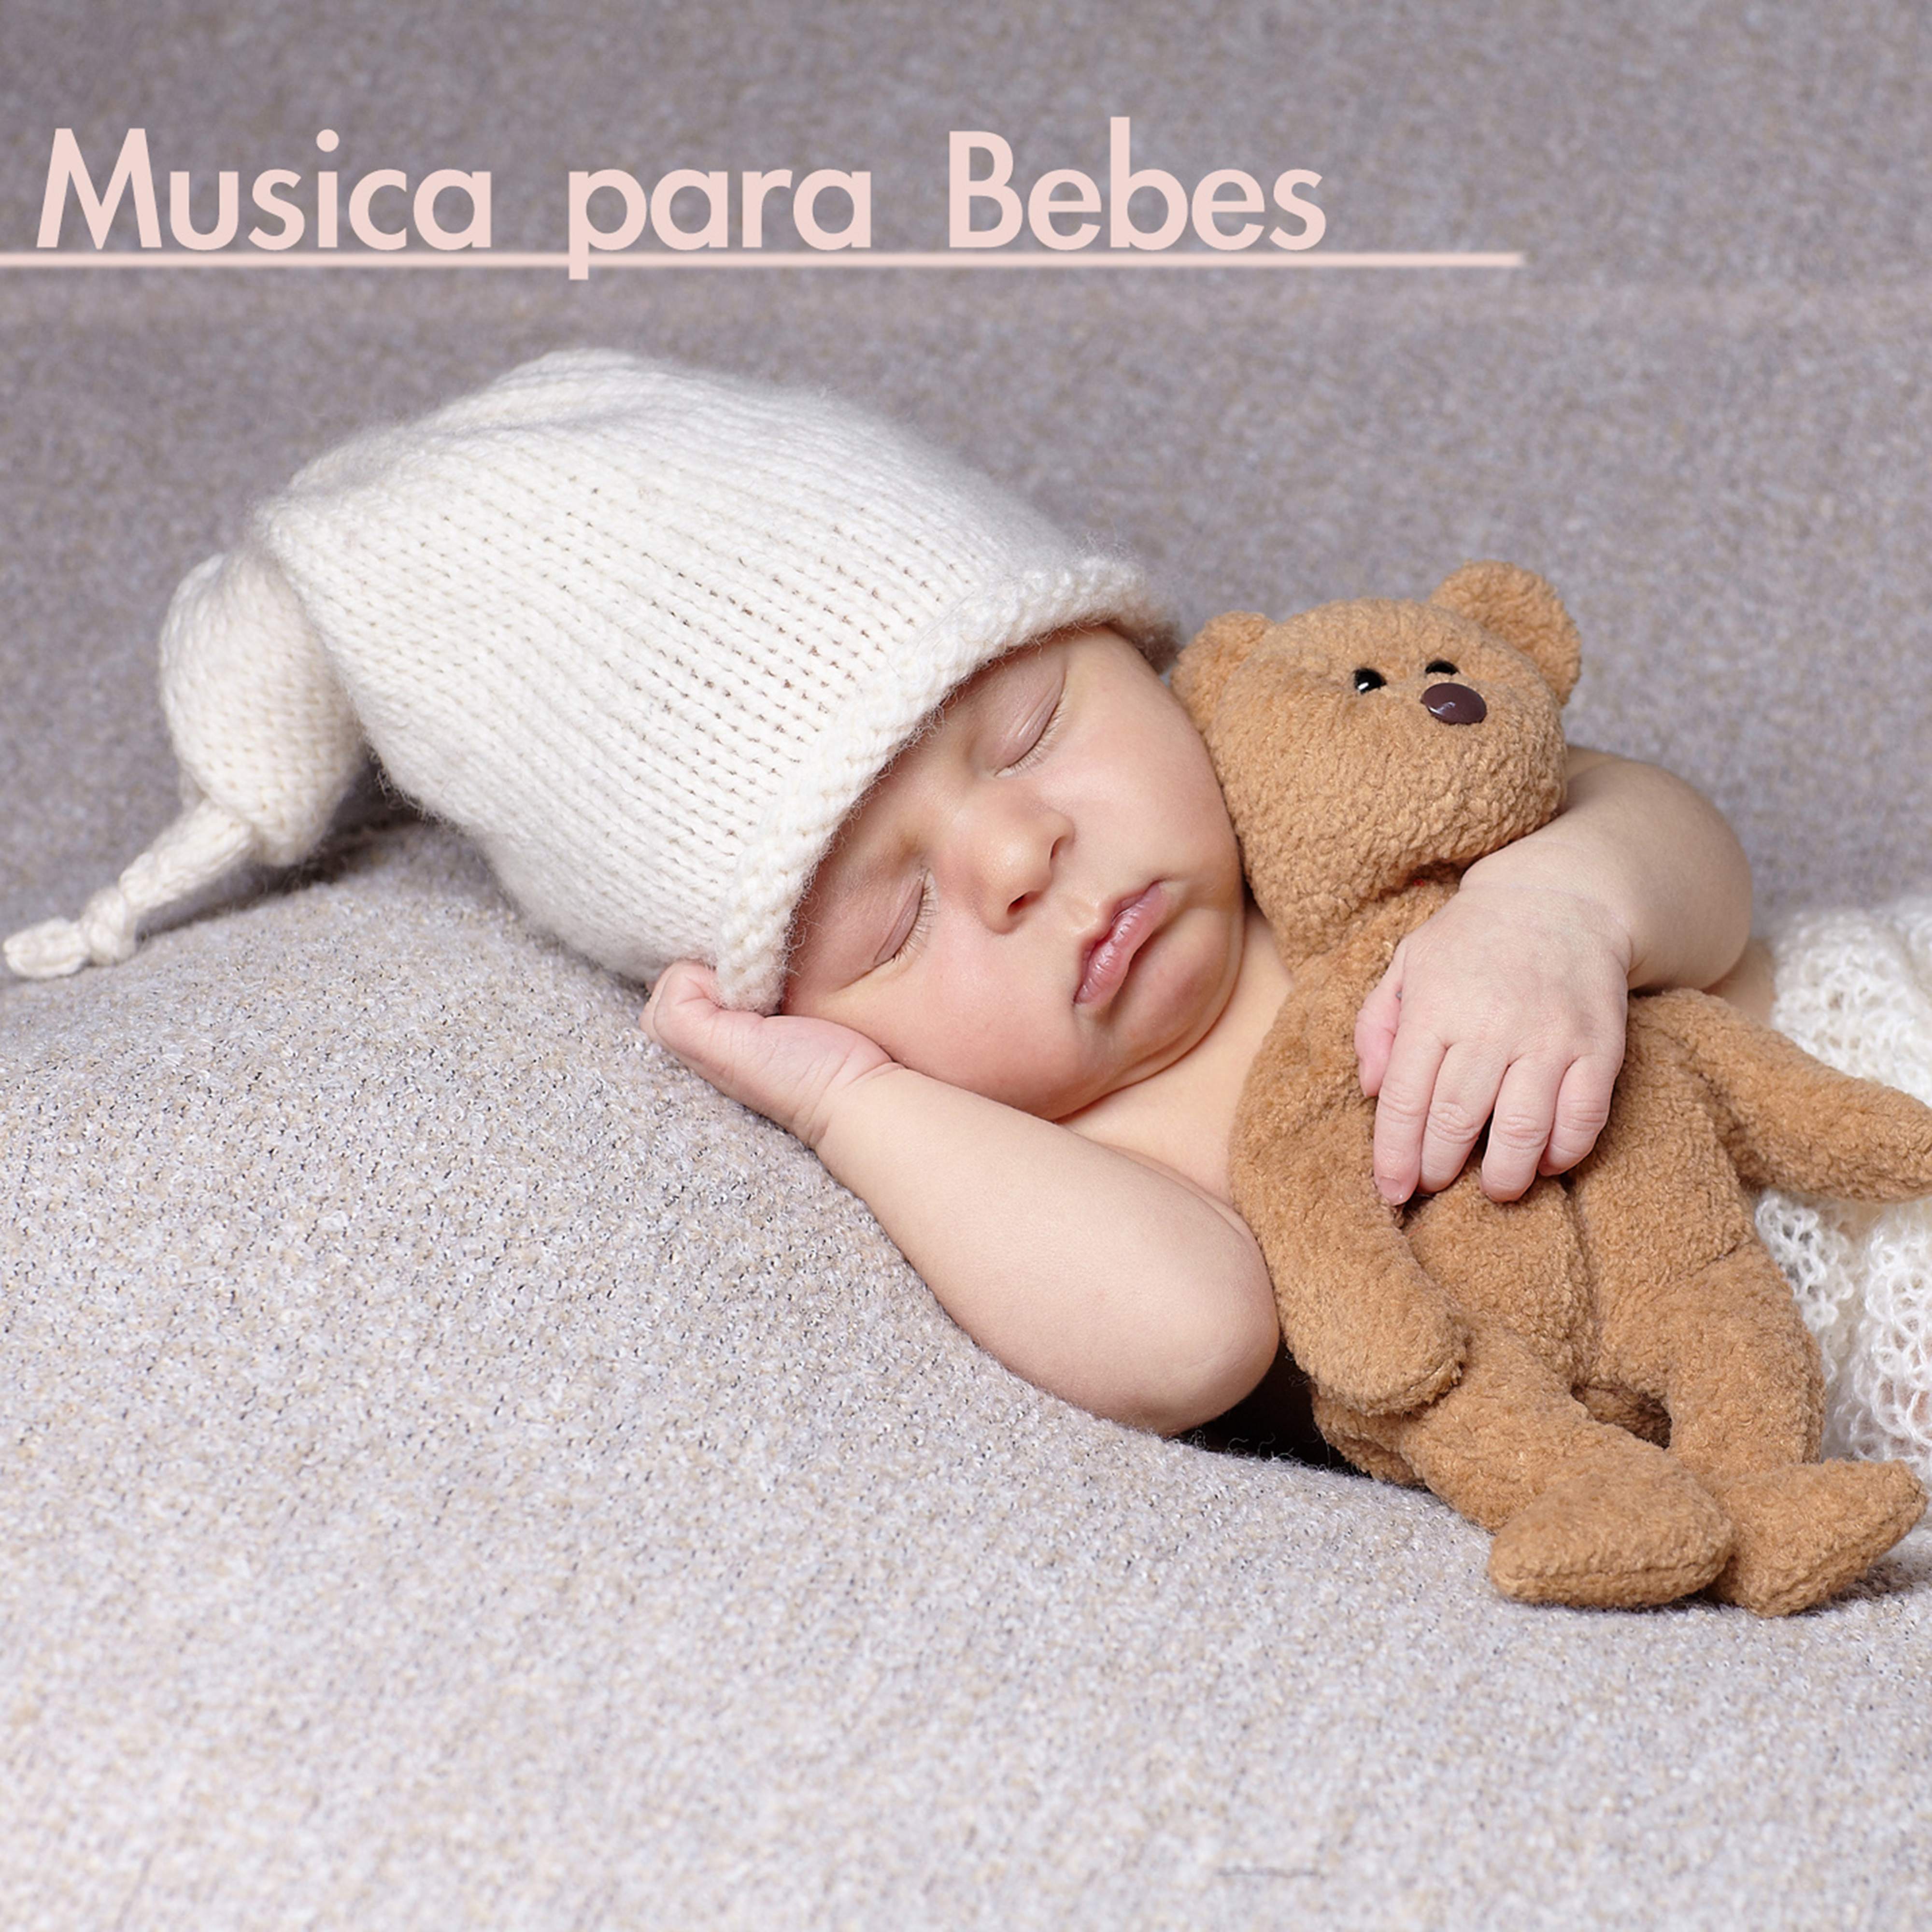 Baby Piano Relaxation